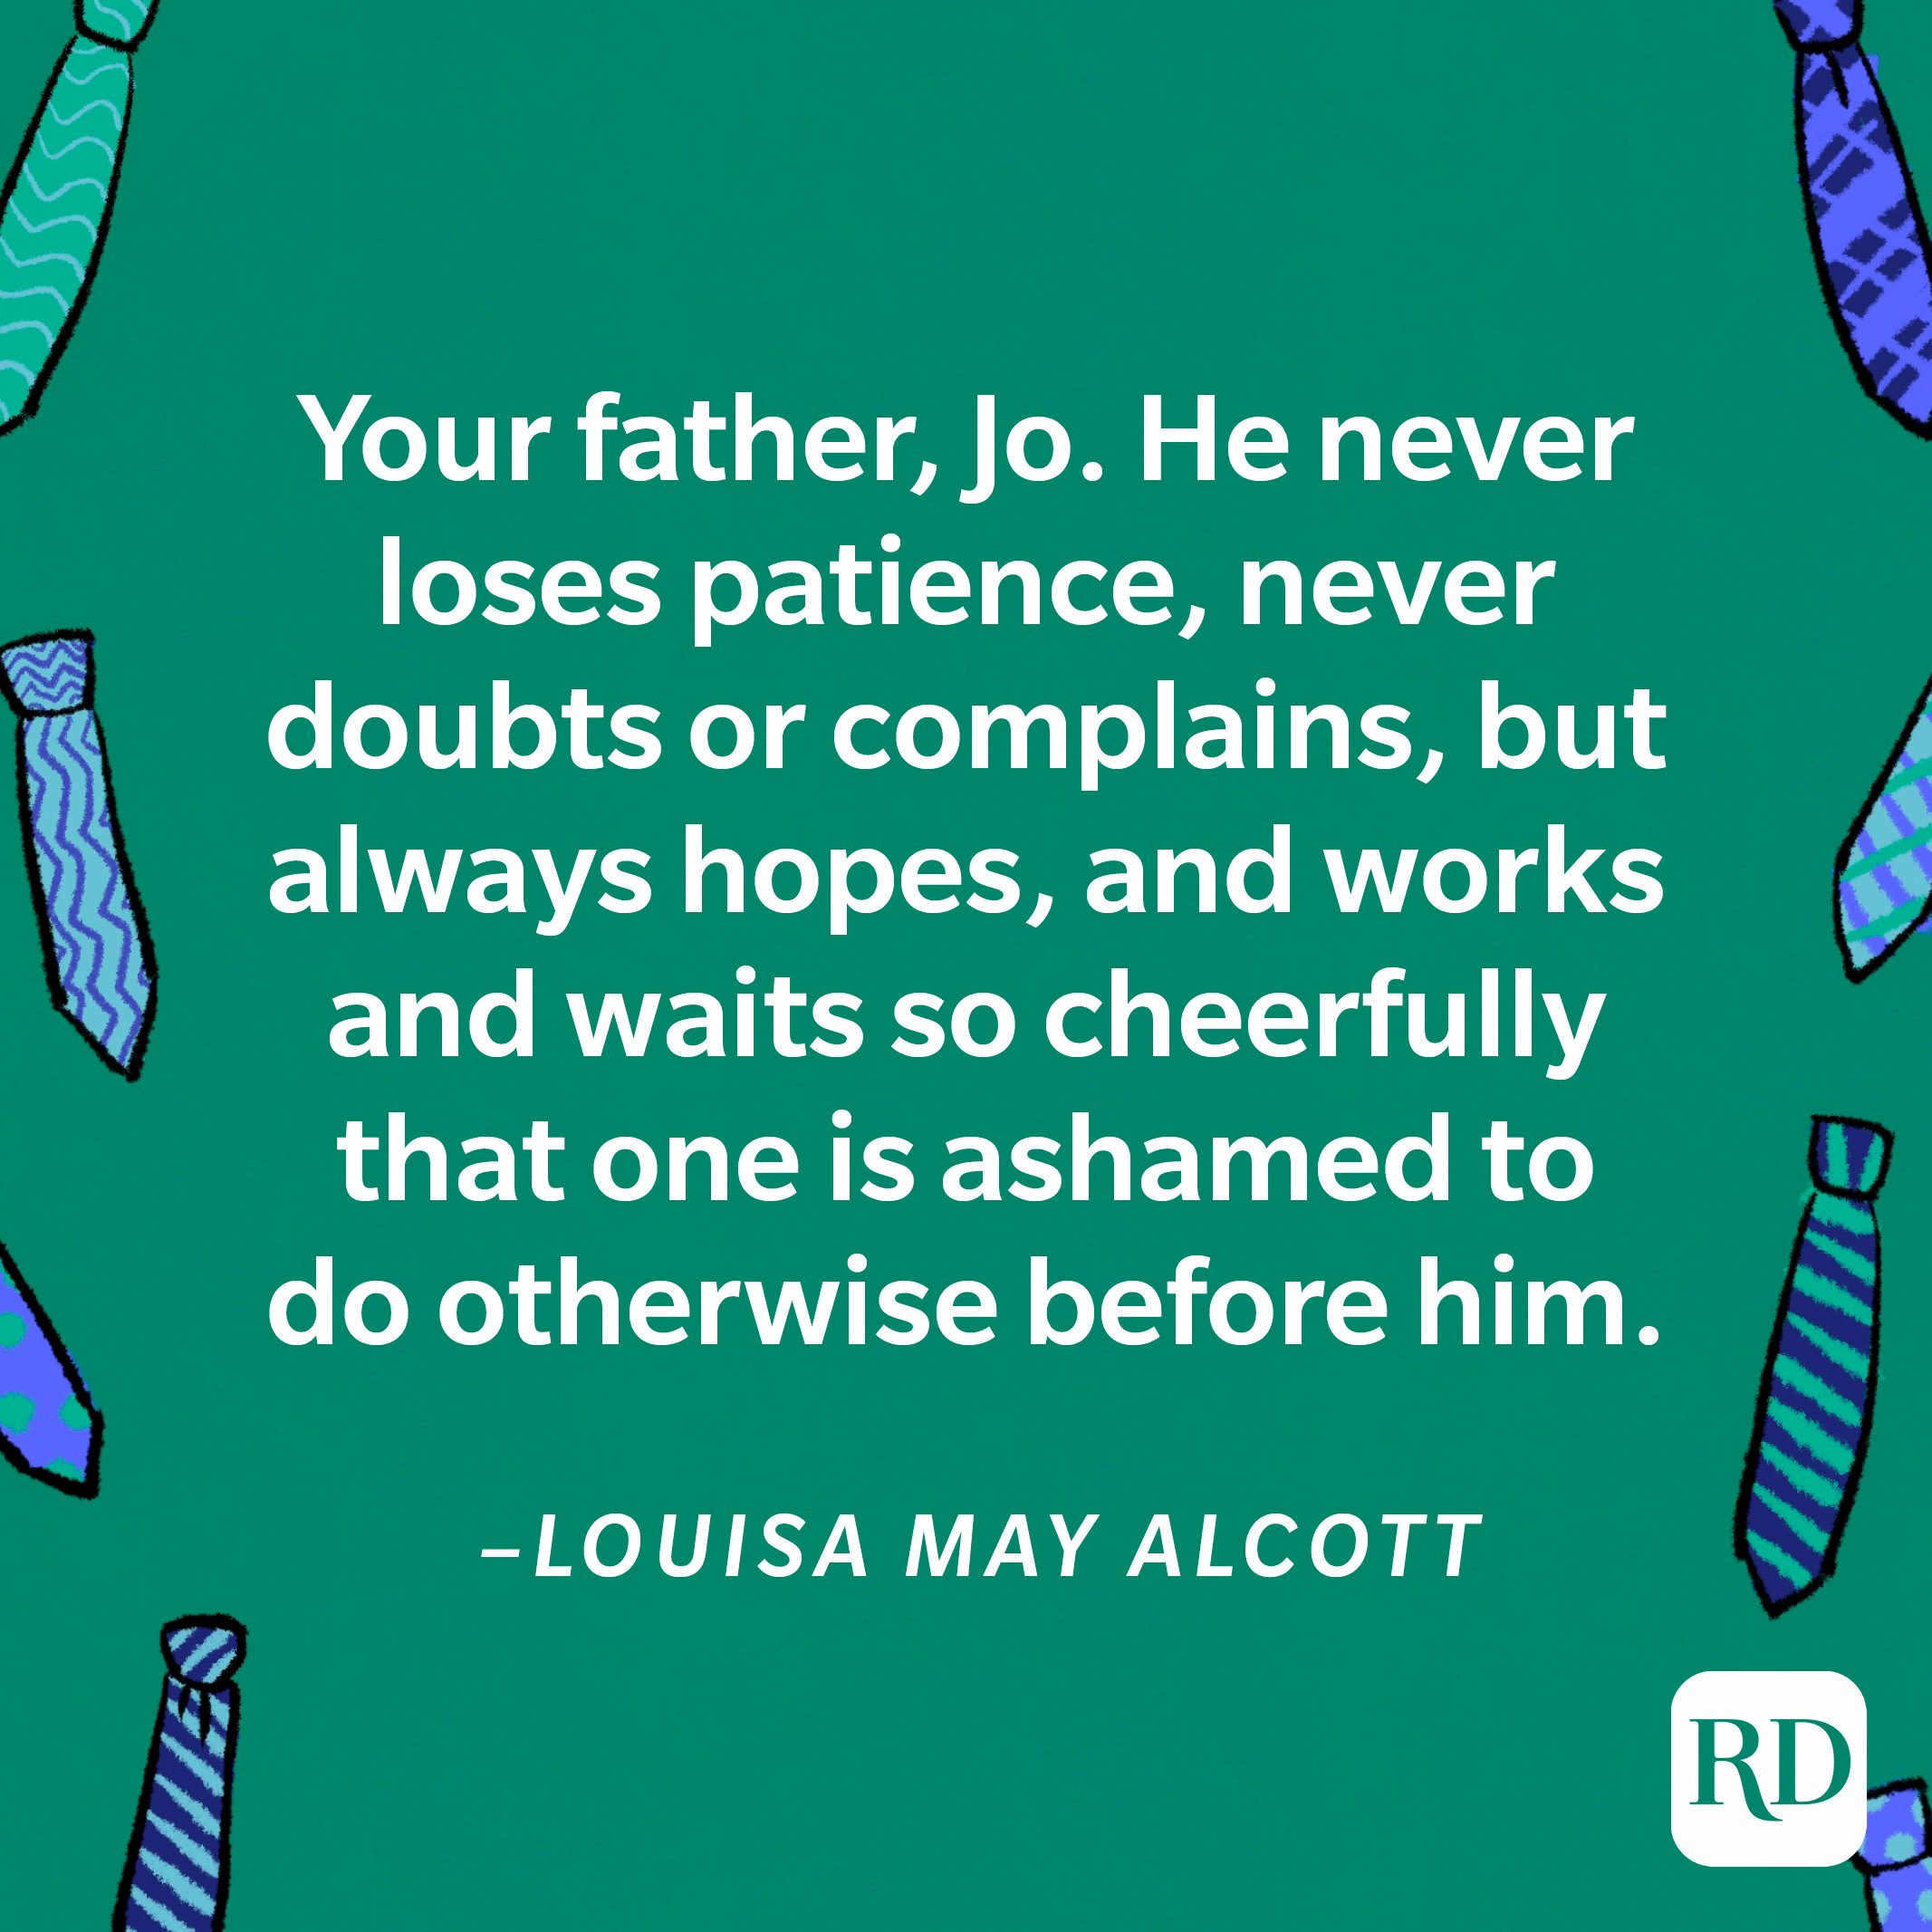 “Your father, Jo. He never loses patience, never doubts or complains, but always hopes, and works and waits so cheerfully that one is ashamed to do otherwise before him.”—Louisa May Alcott 9